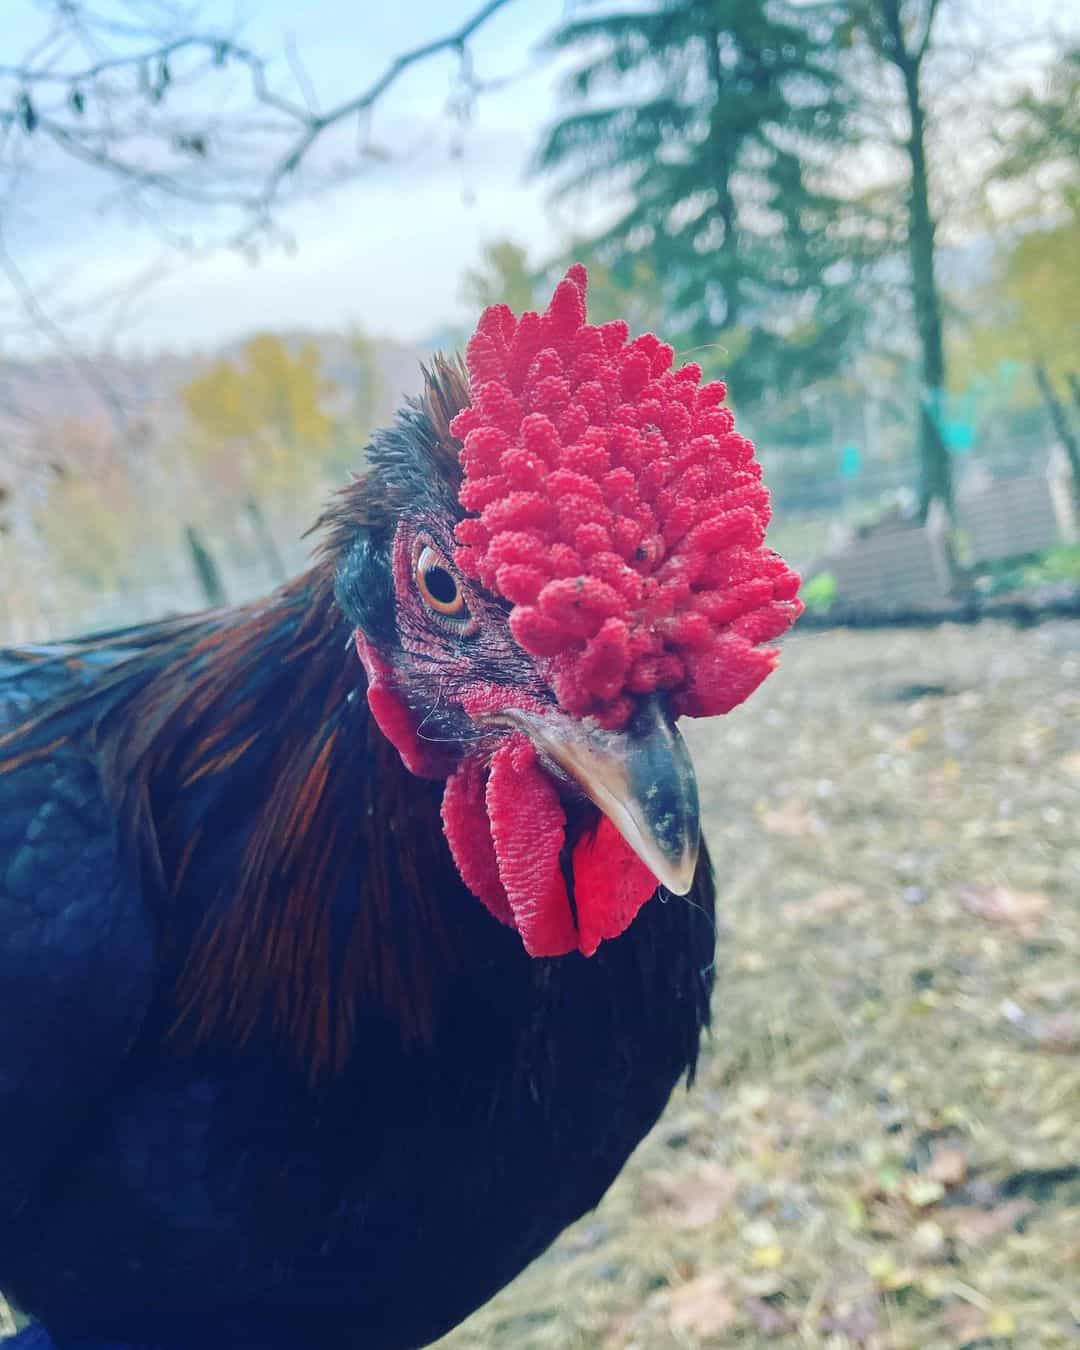 What do Redcap chickens look like?